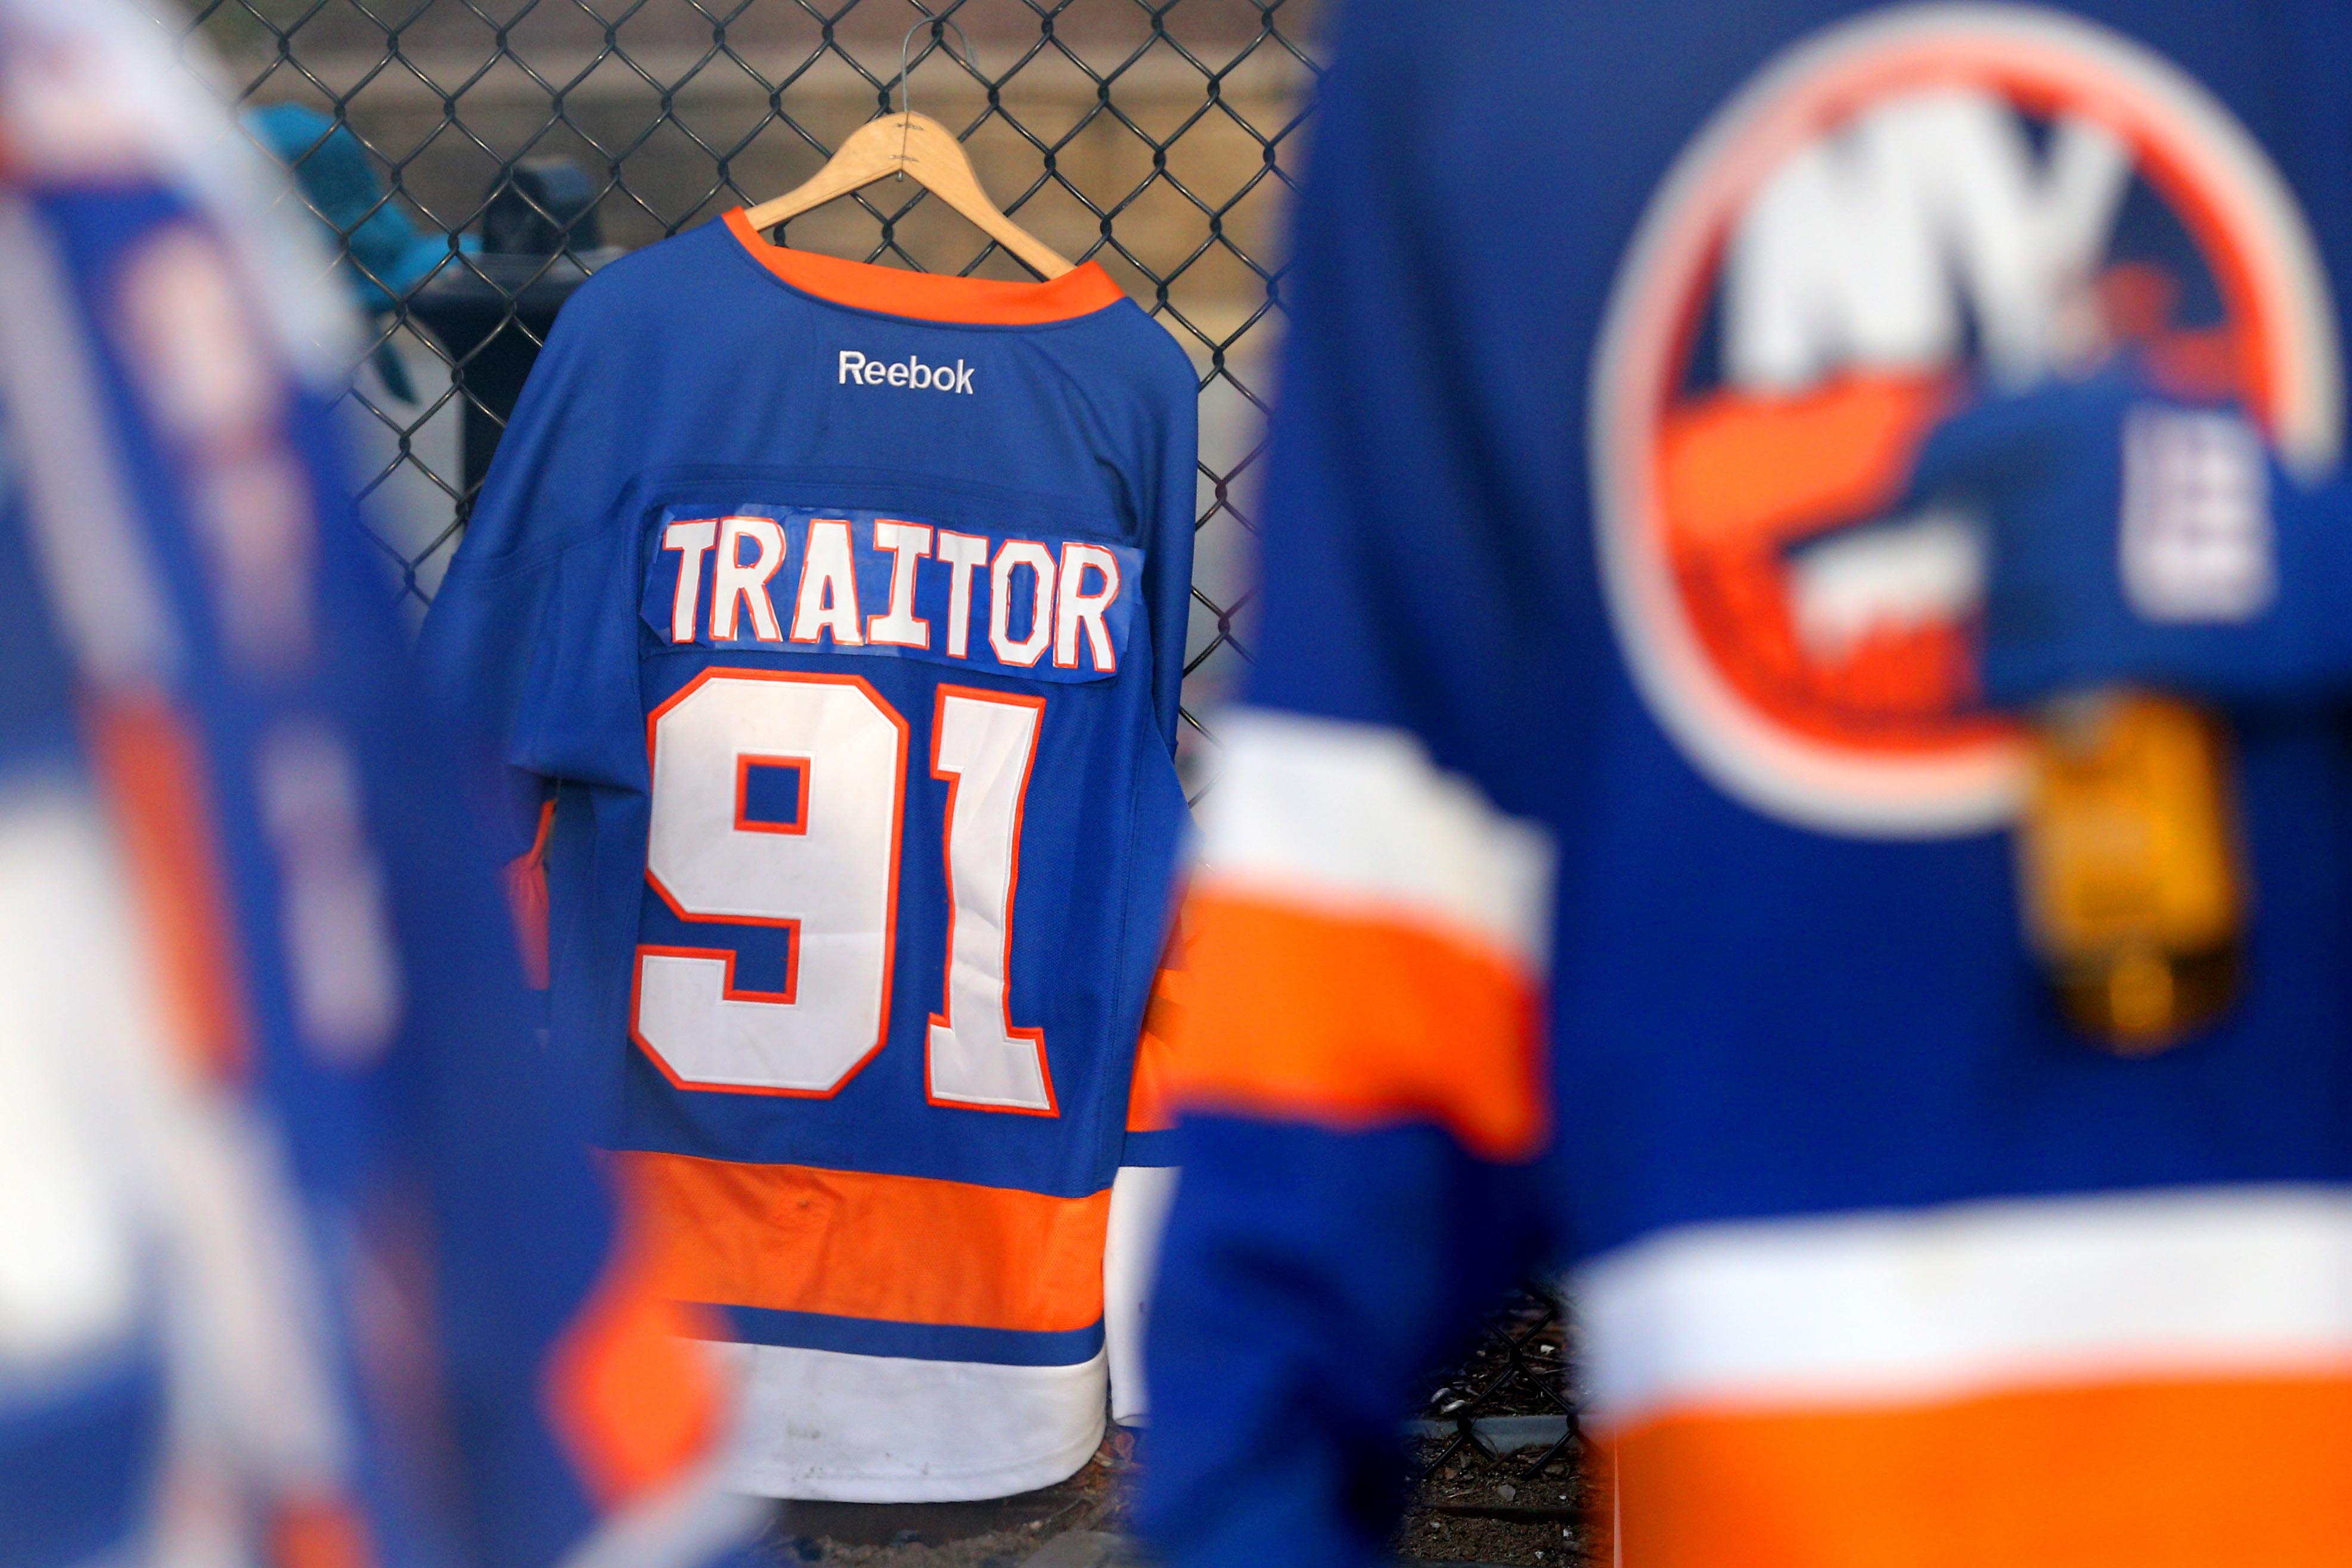 Feb 28, 2019; Brooklyn, NY, USA; New York Islanders fans plan to welcome Toronto Maple Leafs center John Tavares (91) back to the Coliseum as they tailgate before a game at the Nassau Veterans Memorial Coliseum. Mandatory Credit: Brad Penner-USA TODAY Sports